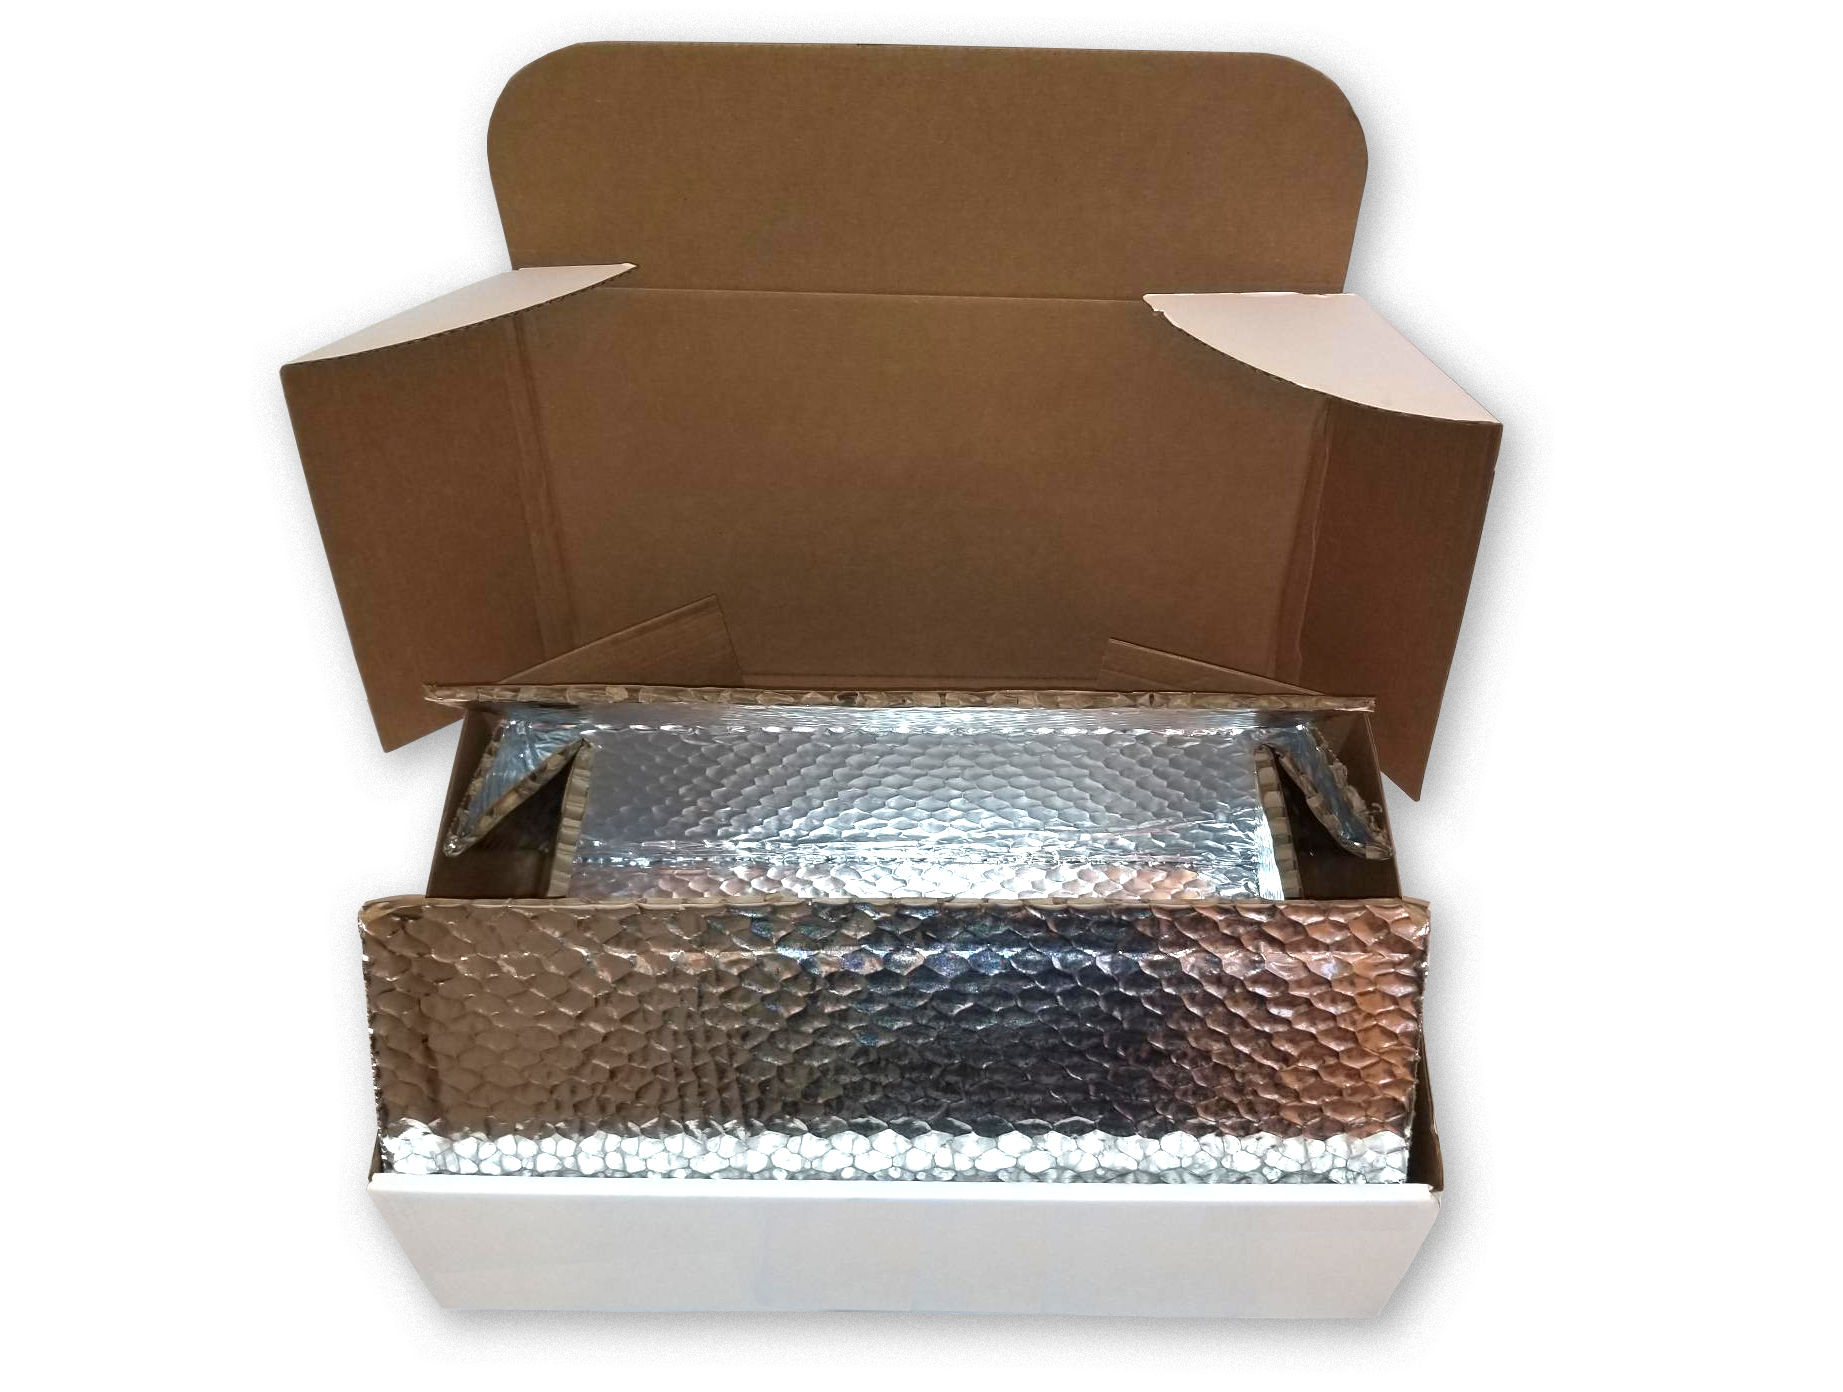 Stamar Packaging insulated shippers